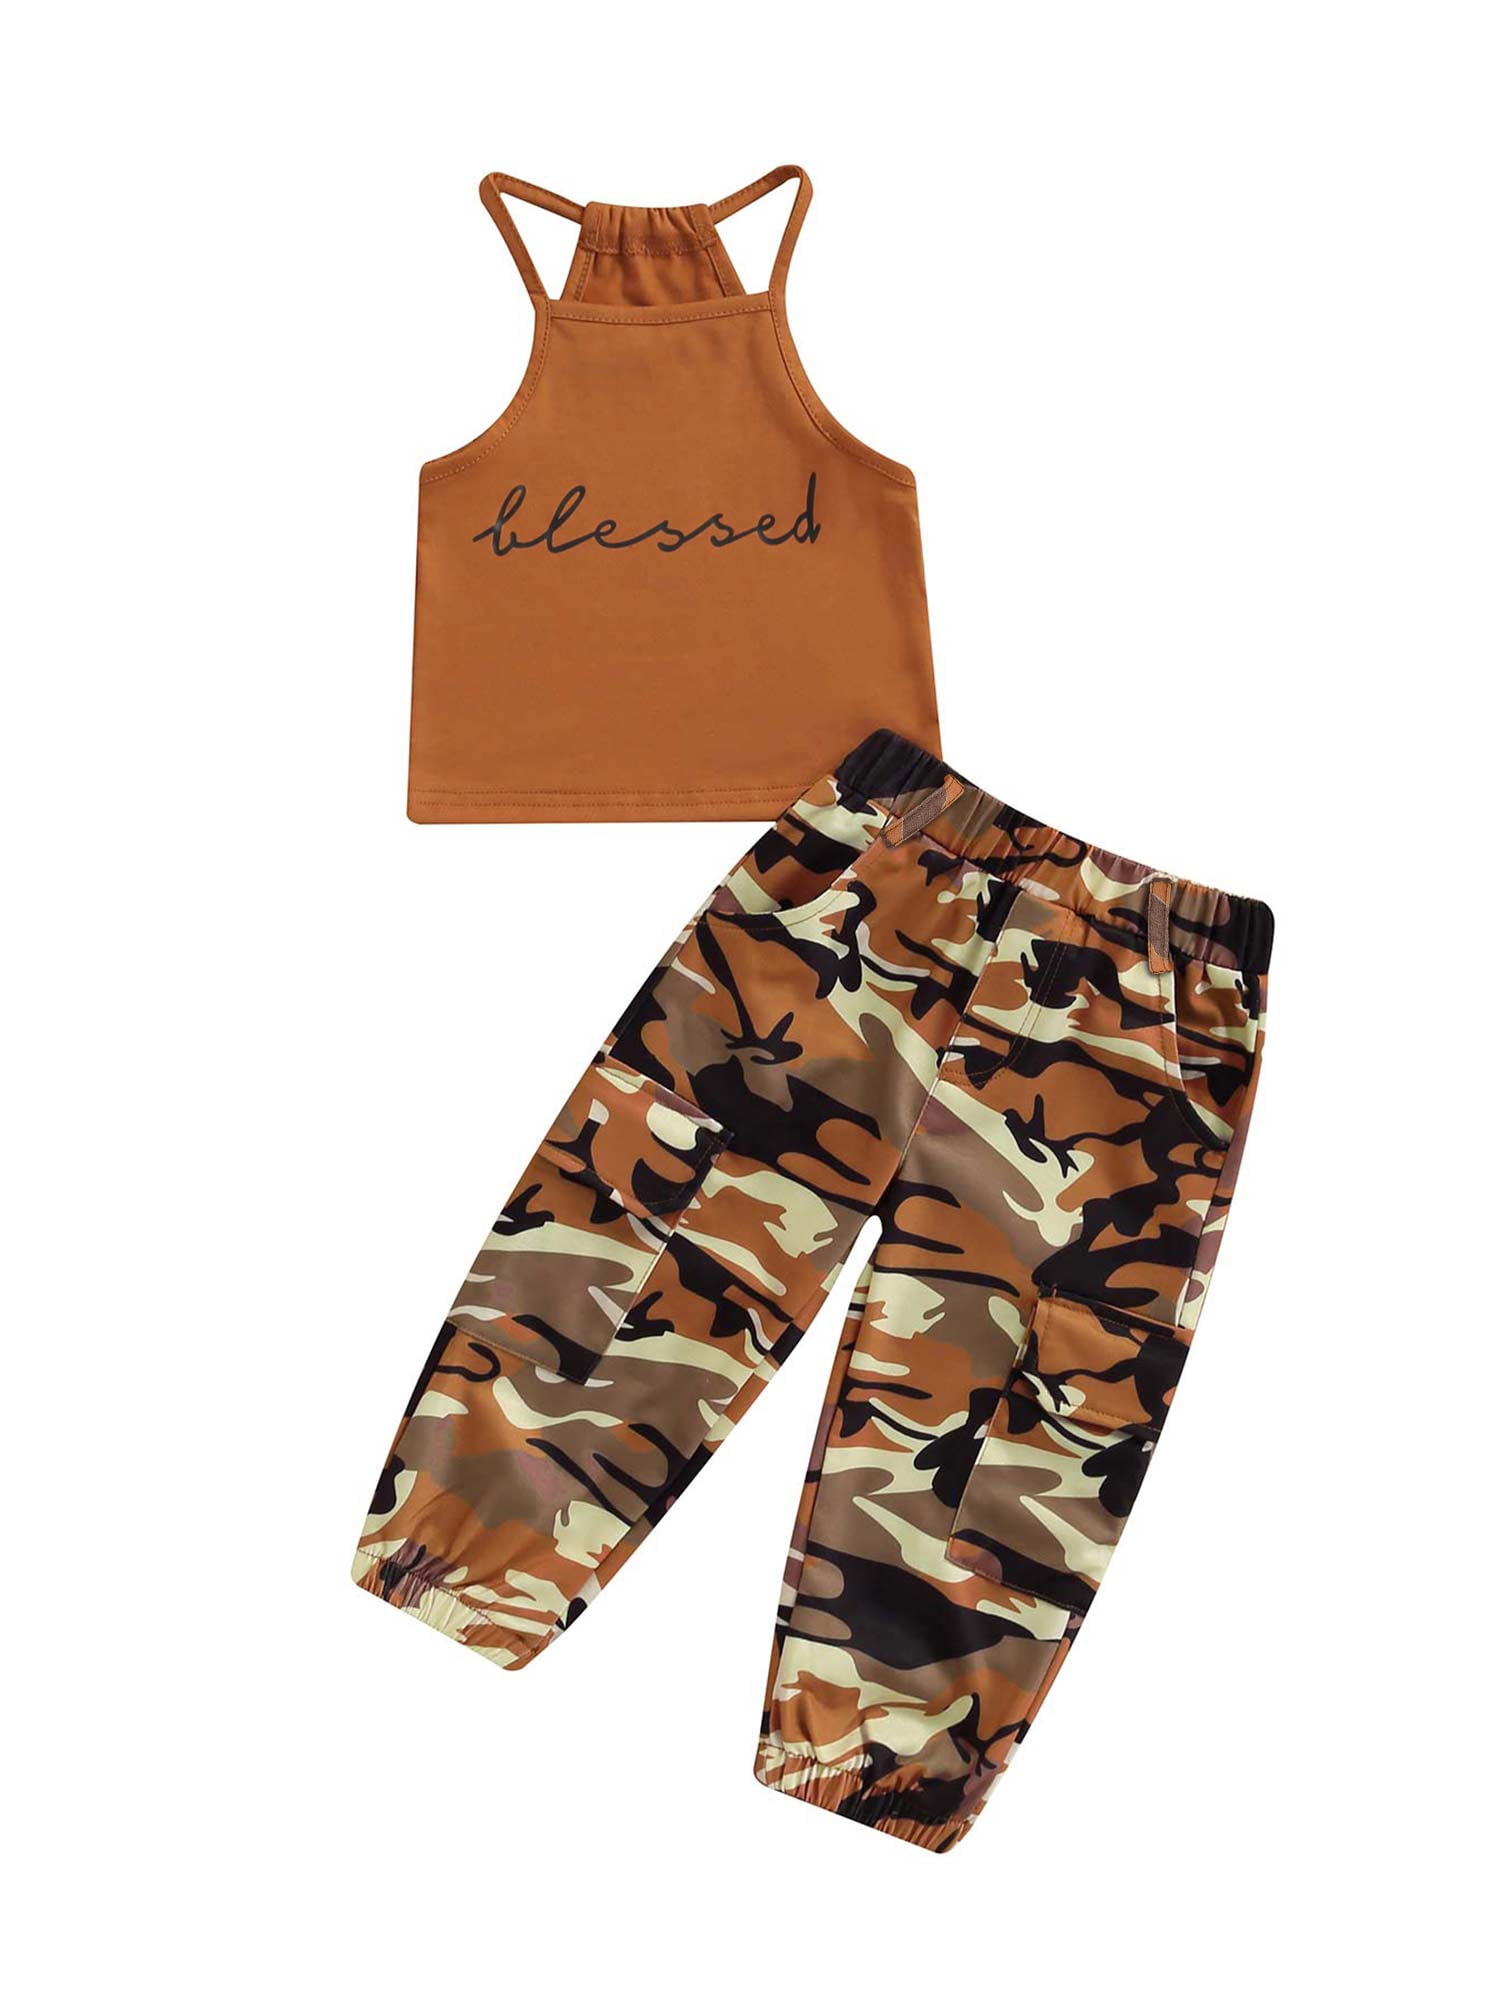 Ma&Baby Toddler Baby Girls Kids Crop Top and Jeans Camo Pants Outfits  Clothes Set 